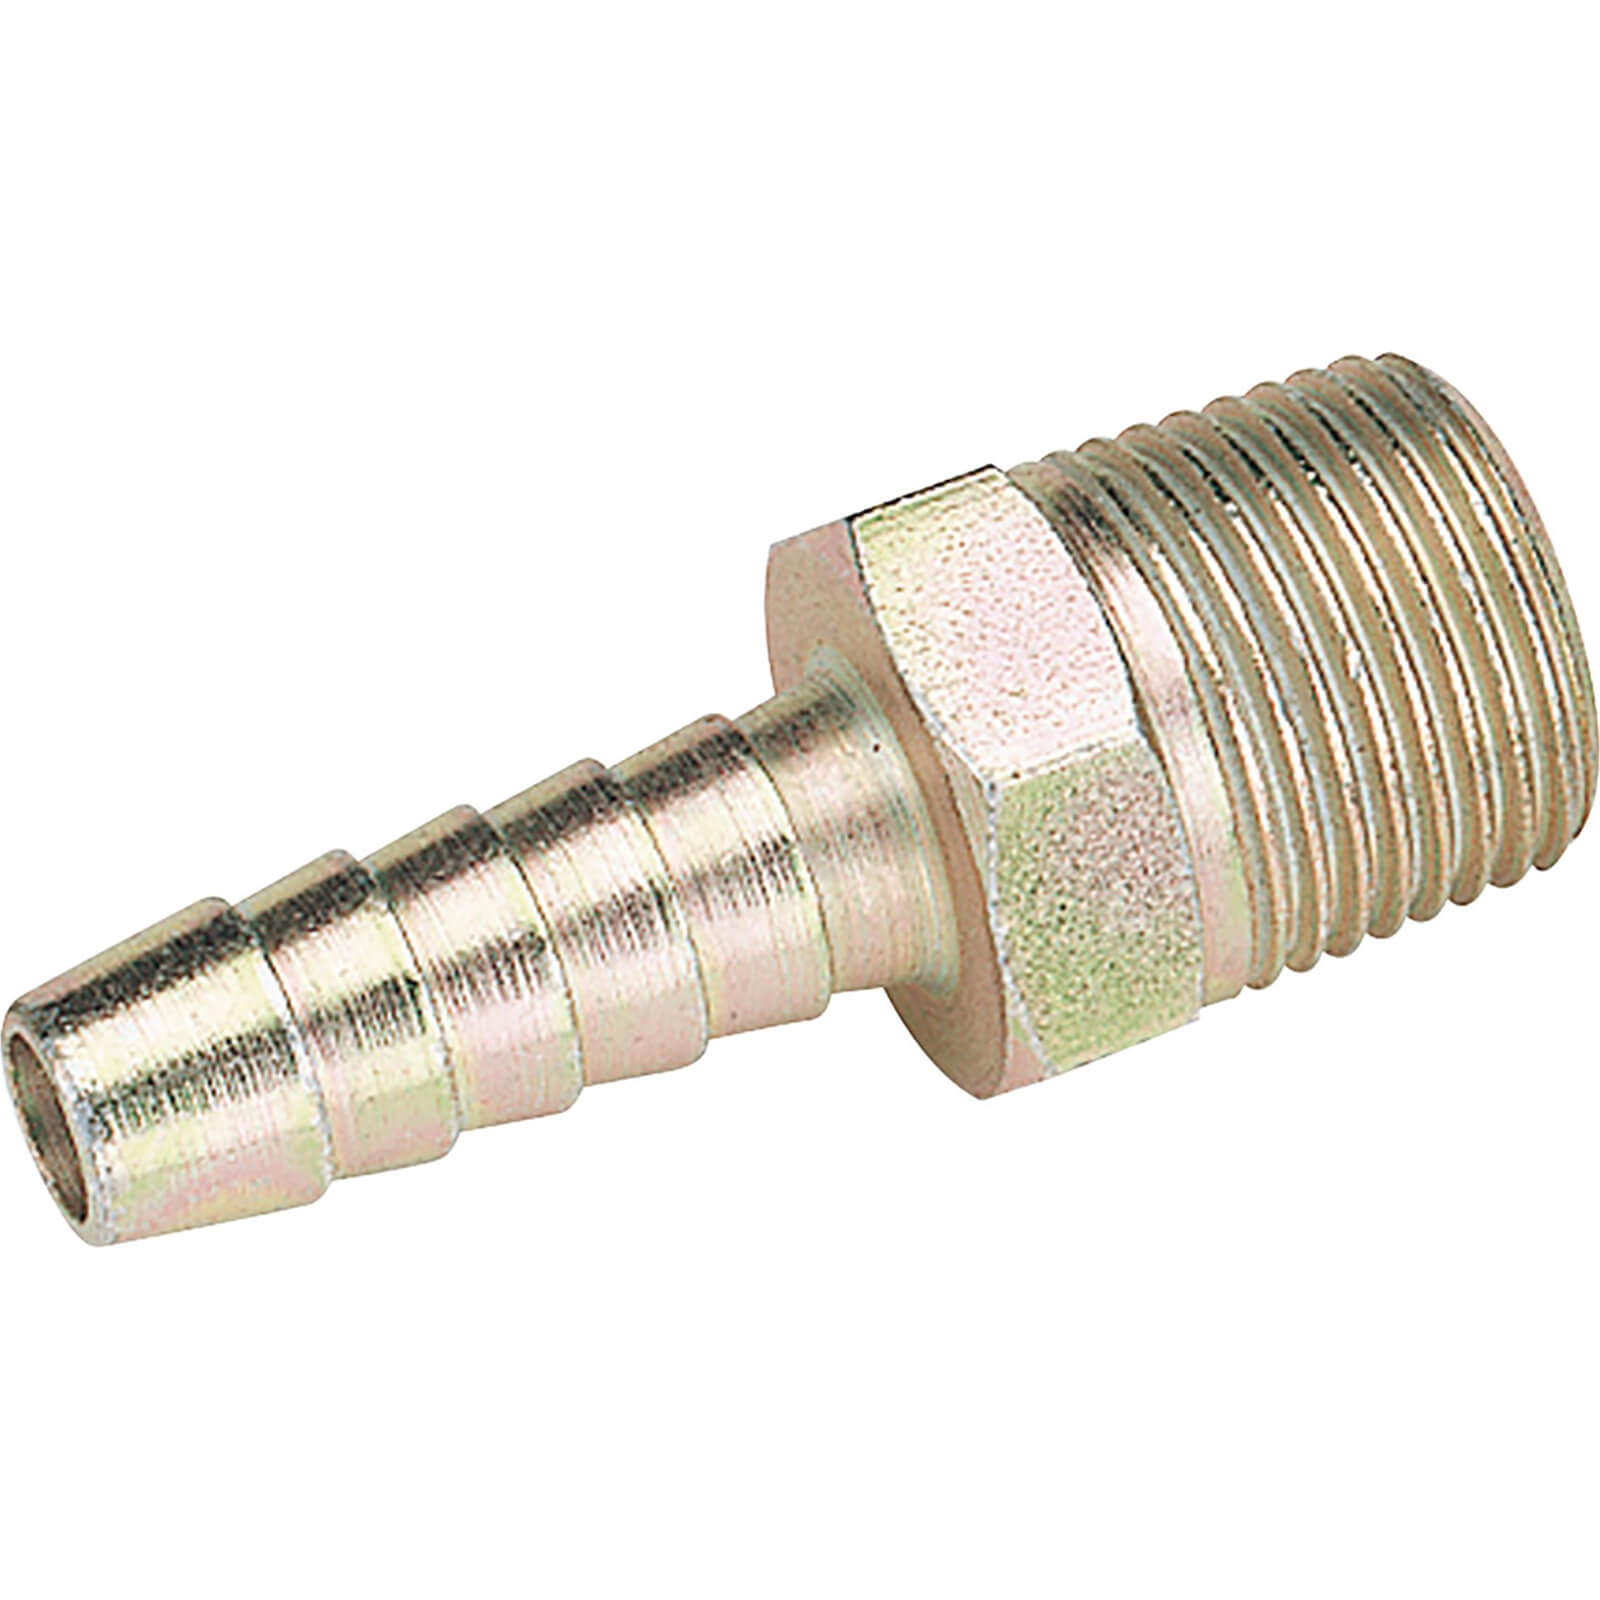 Image of Draper PCL Tailpiece Air Line Fitting BSPT Male Thread 3/8" BSP 5/16" Pack of 3